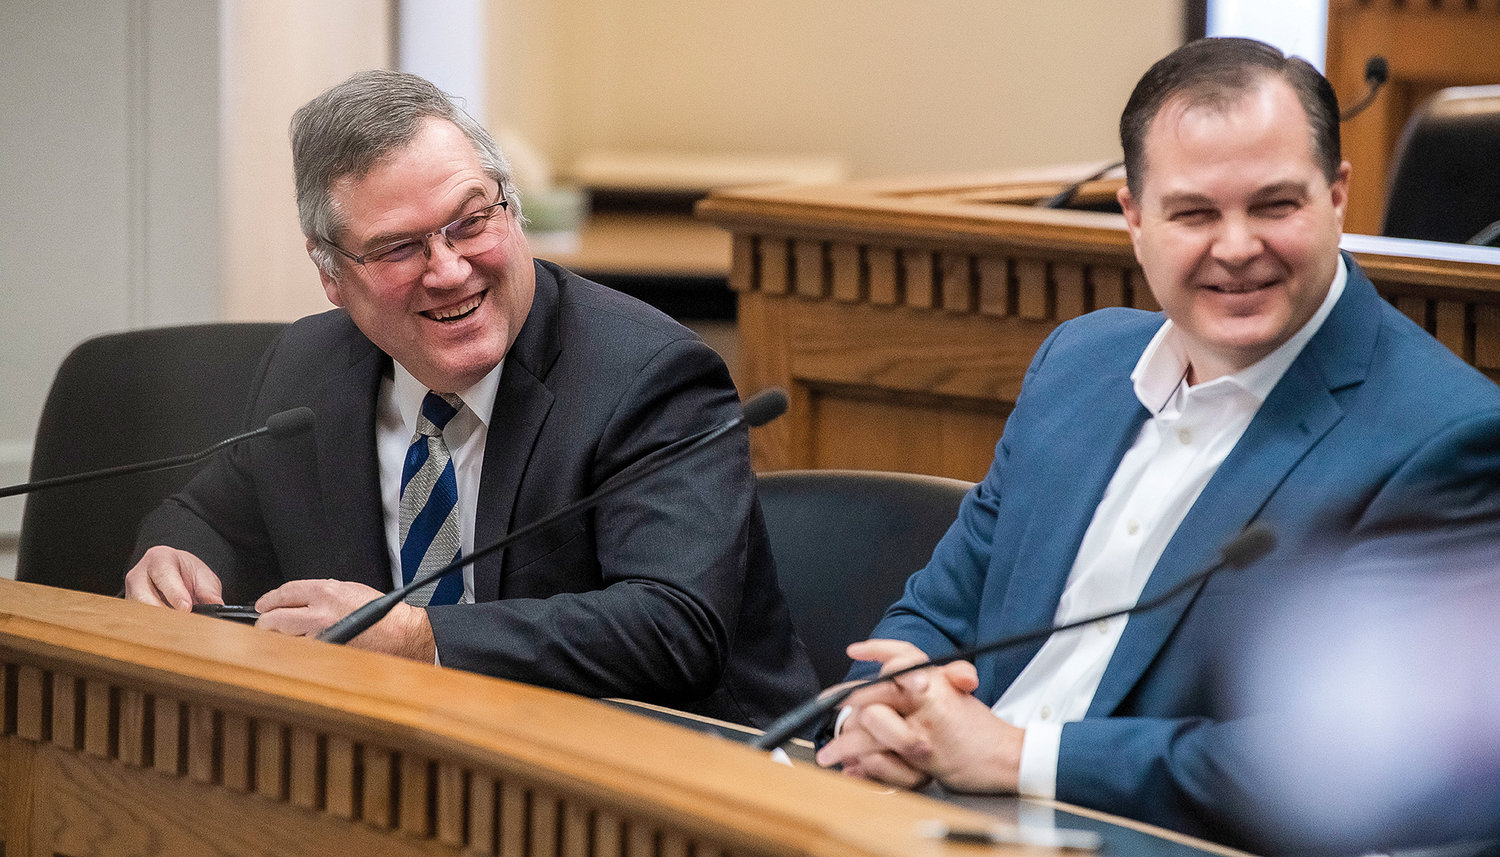 State Rep. J.T. Wilcox, R-Yelm, laughs alongside Sen. John Braun, R-Centralia, while talking to members of the press inside the John A. Cherberg Building in Olympia on Thursday.